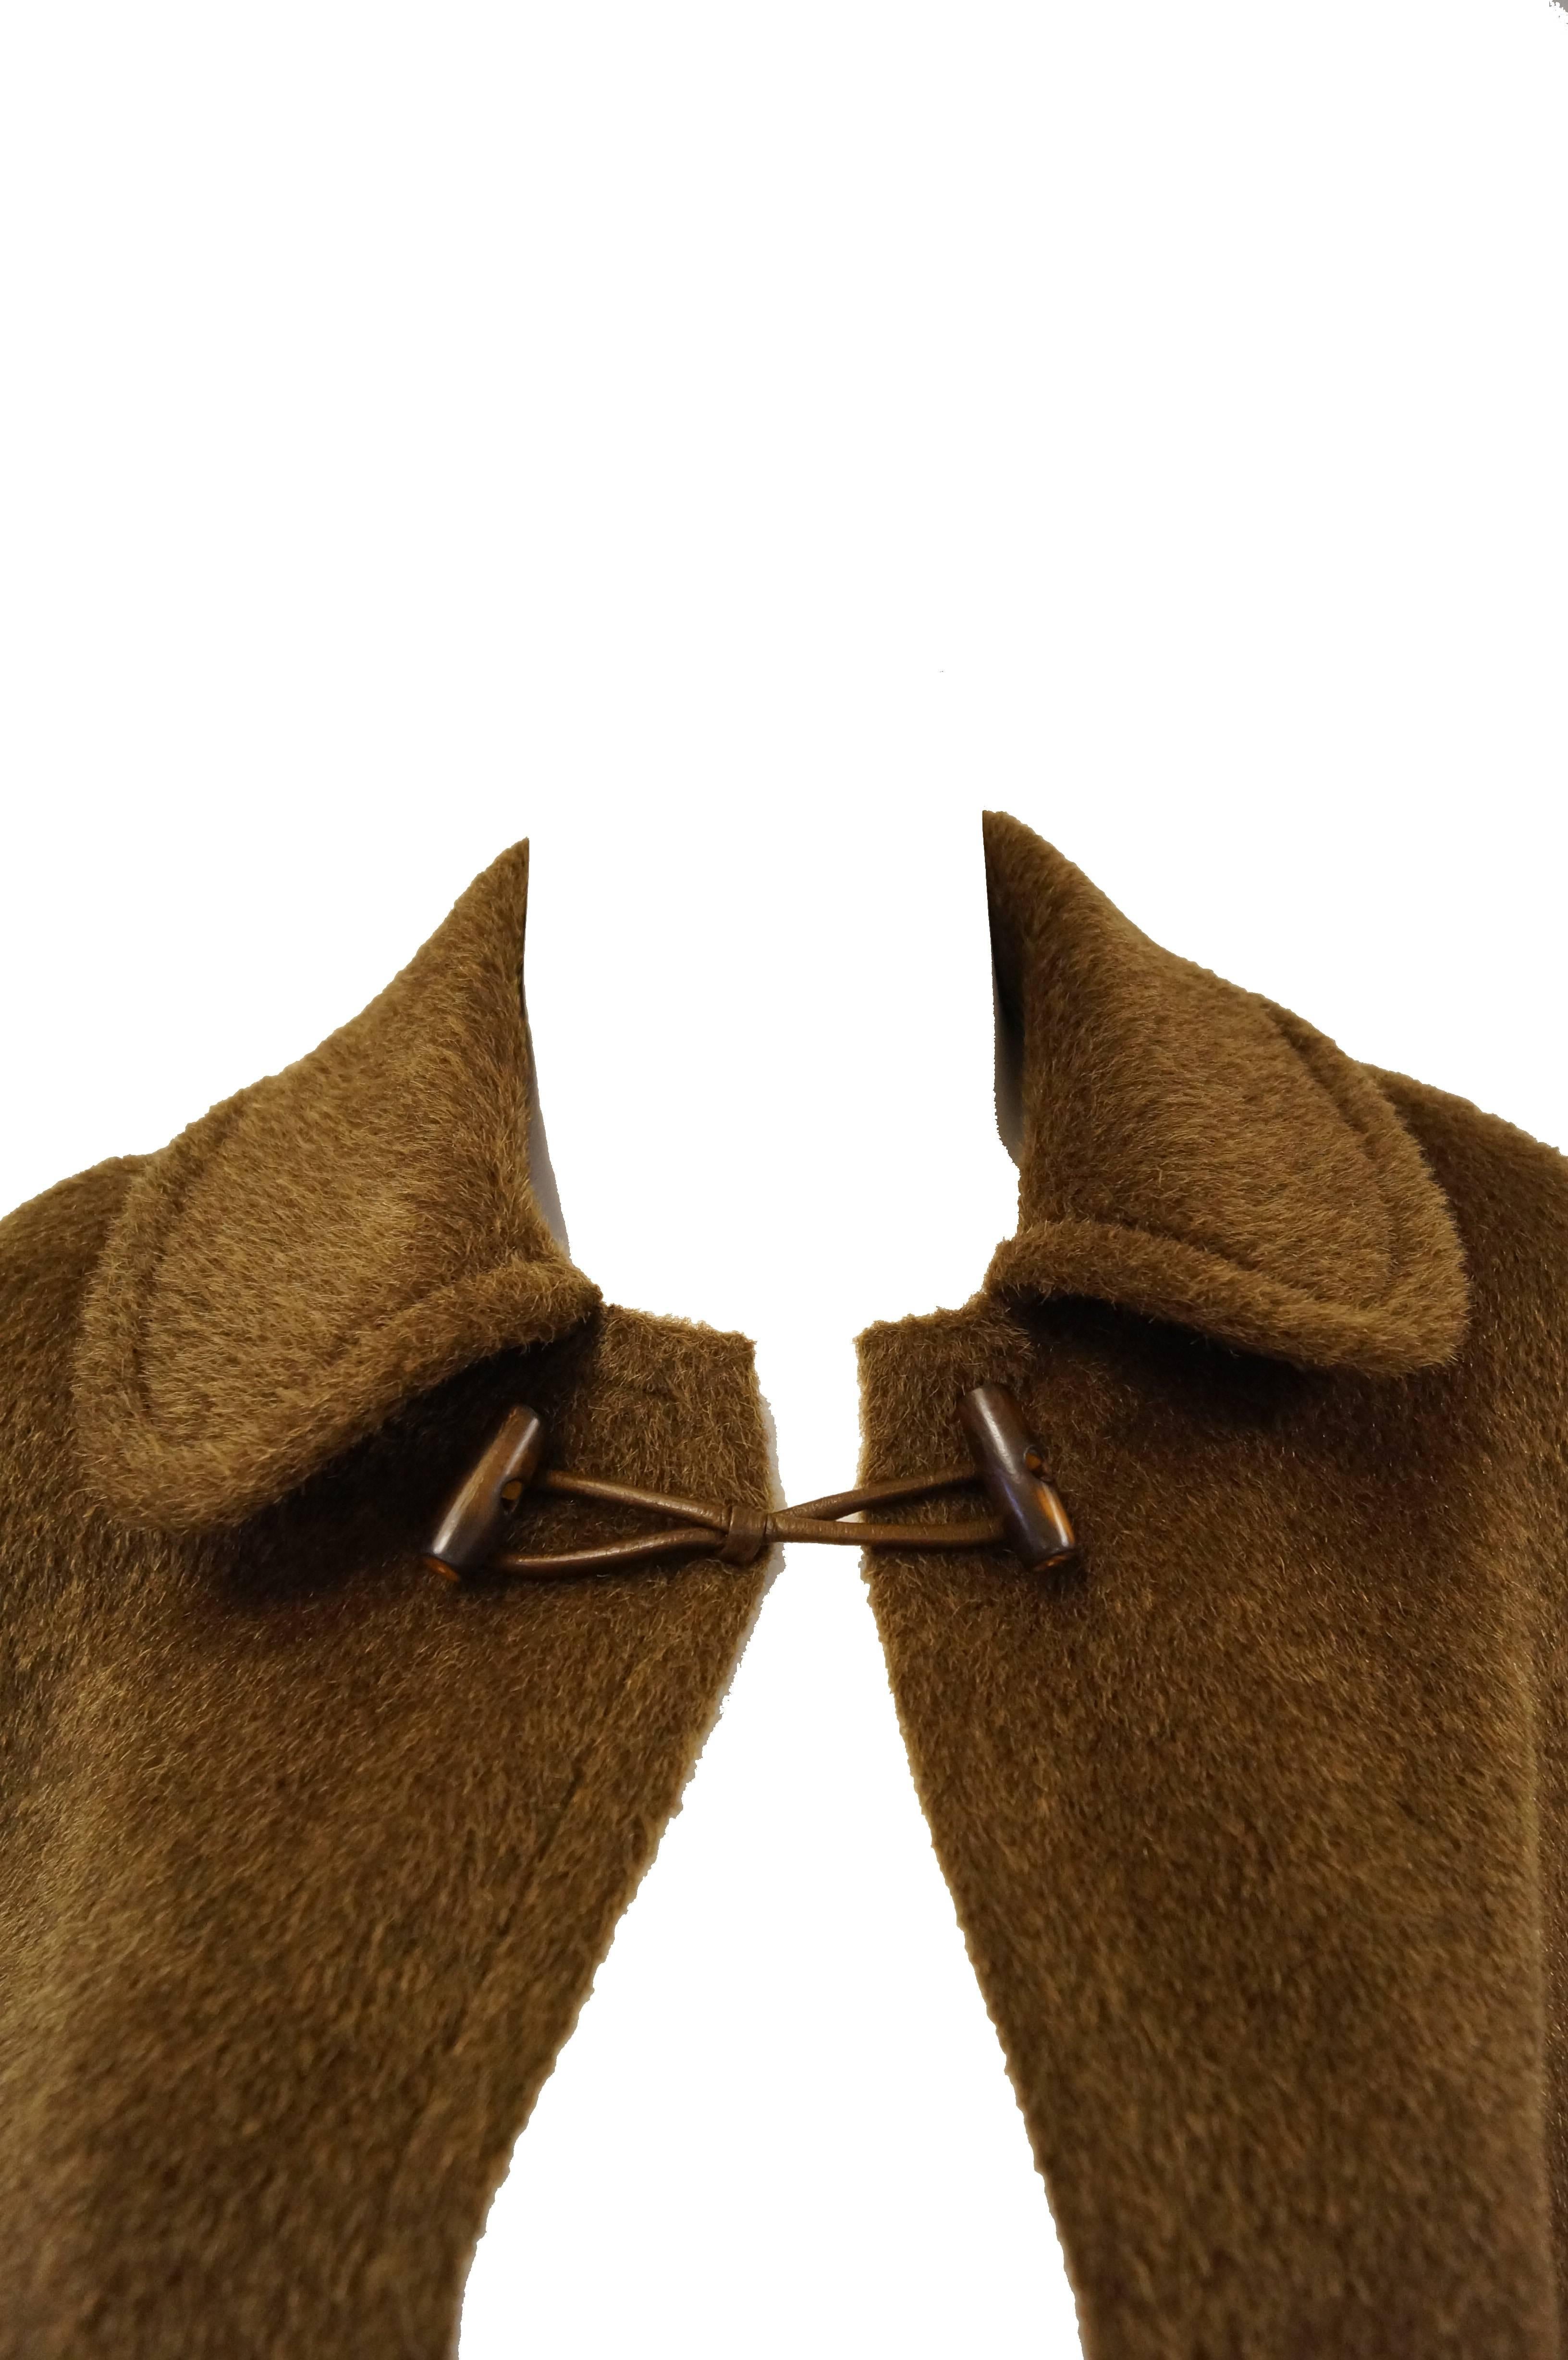 Gorgeous heavy wool cloak by Yves Saint Laurent. The coat features a classic polished wood and leather toggle button at the sturdy square collar (that can be turned up to shield you from the cold!), and is a glamorous shin-length. The cloak is a